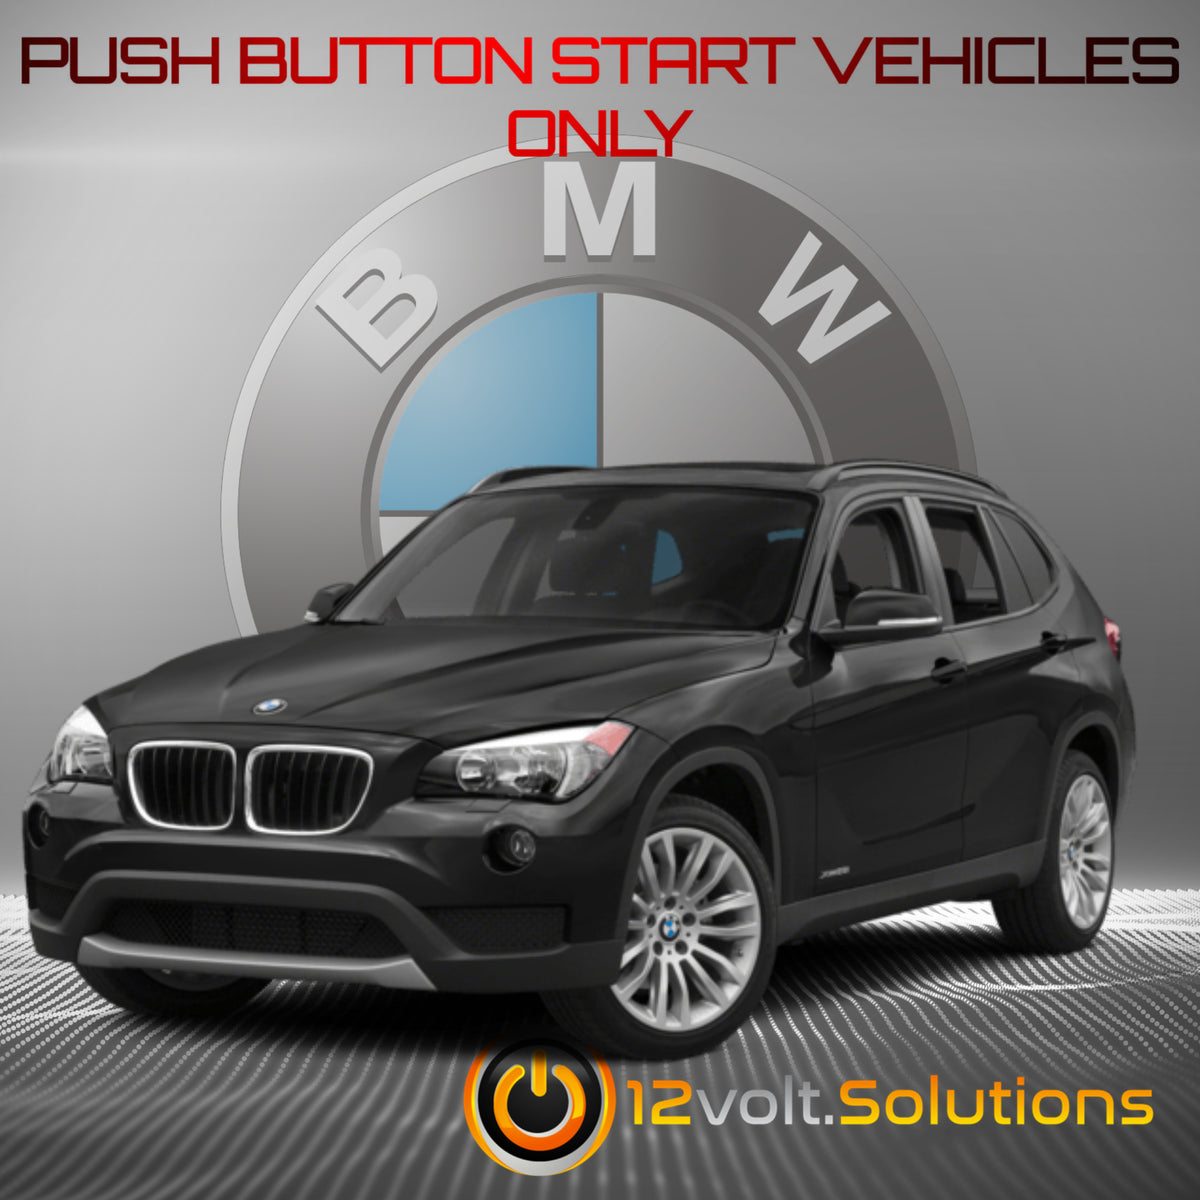 2012-2015 BMW X1 Plug and Play Remote Start Kit (Push Button Start)-12Volt.Solutions